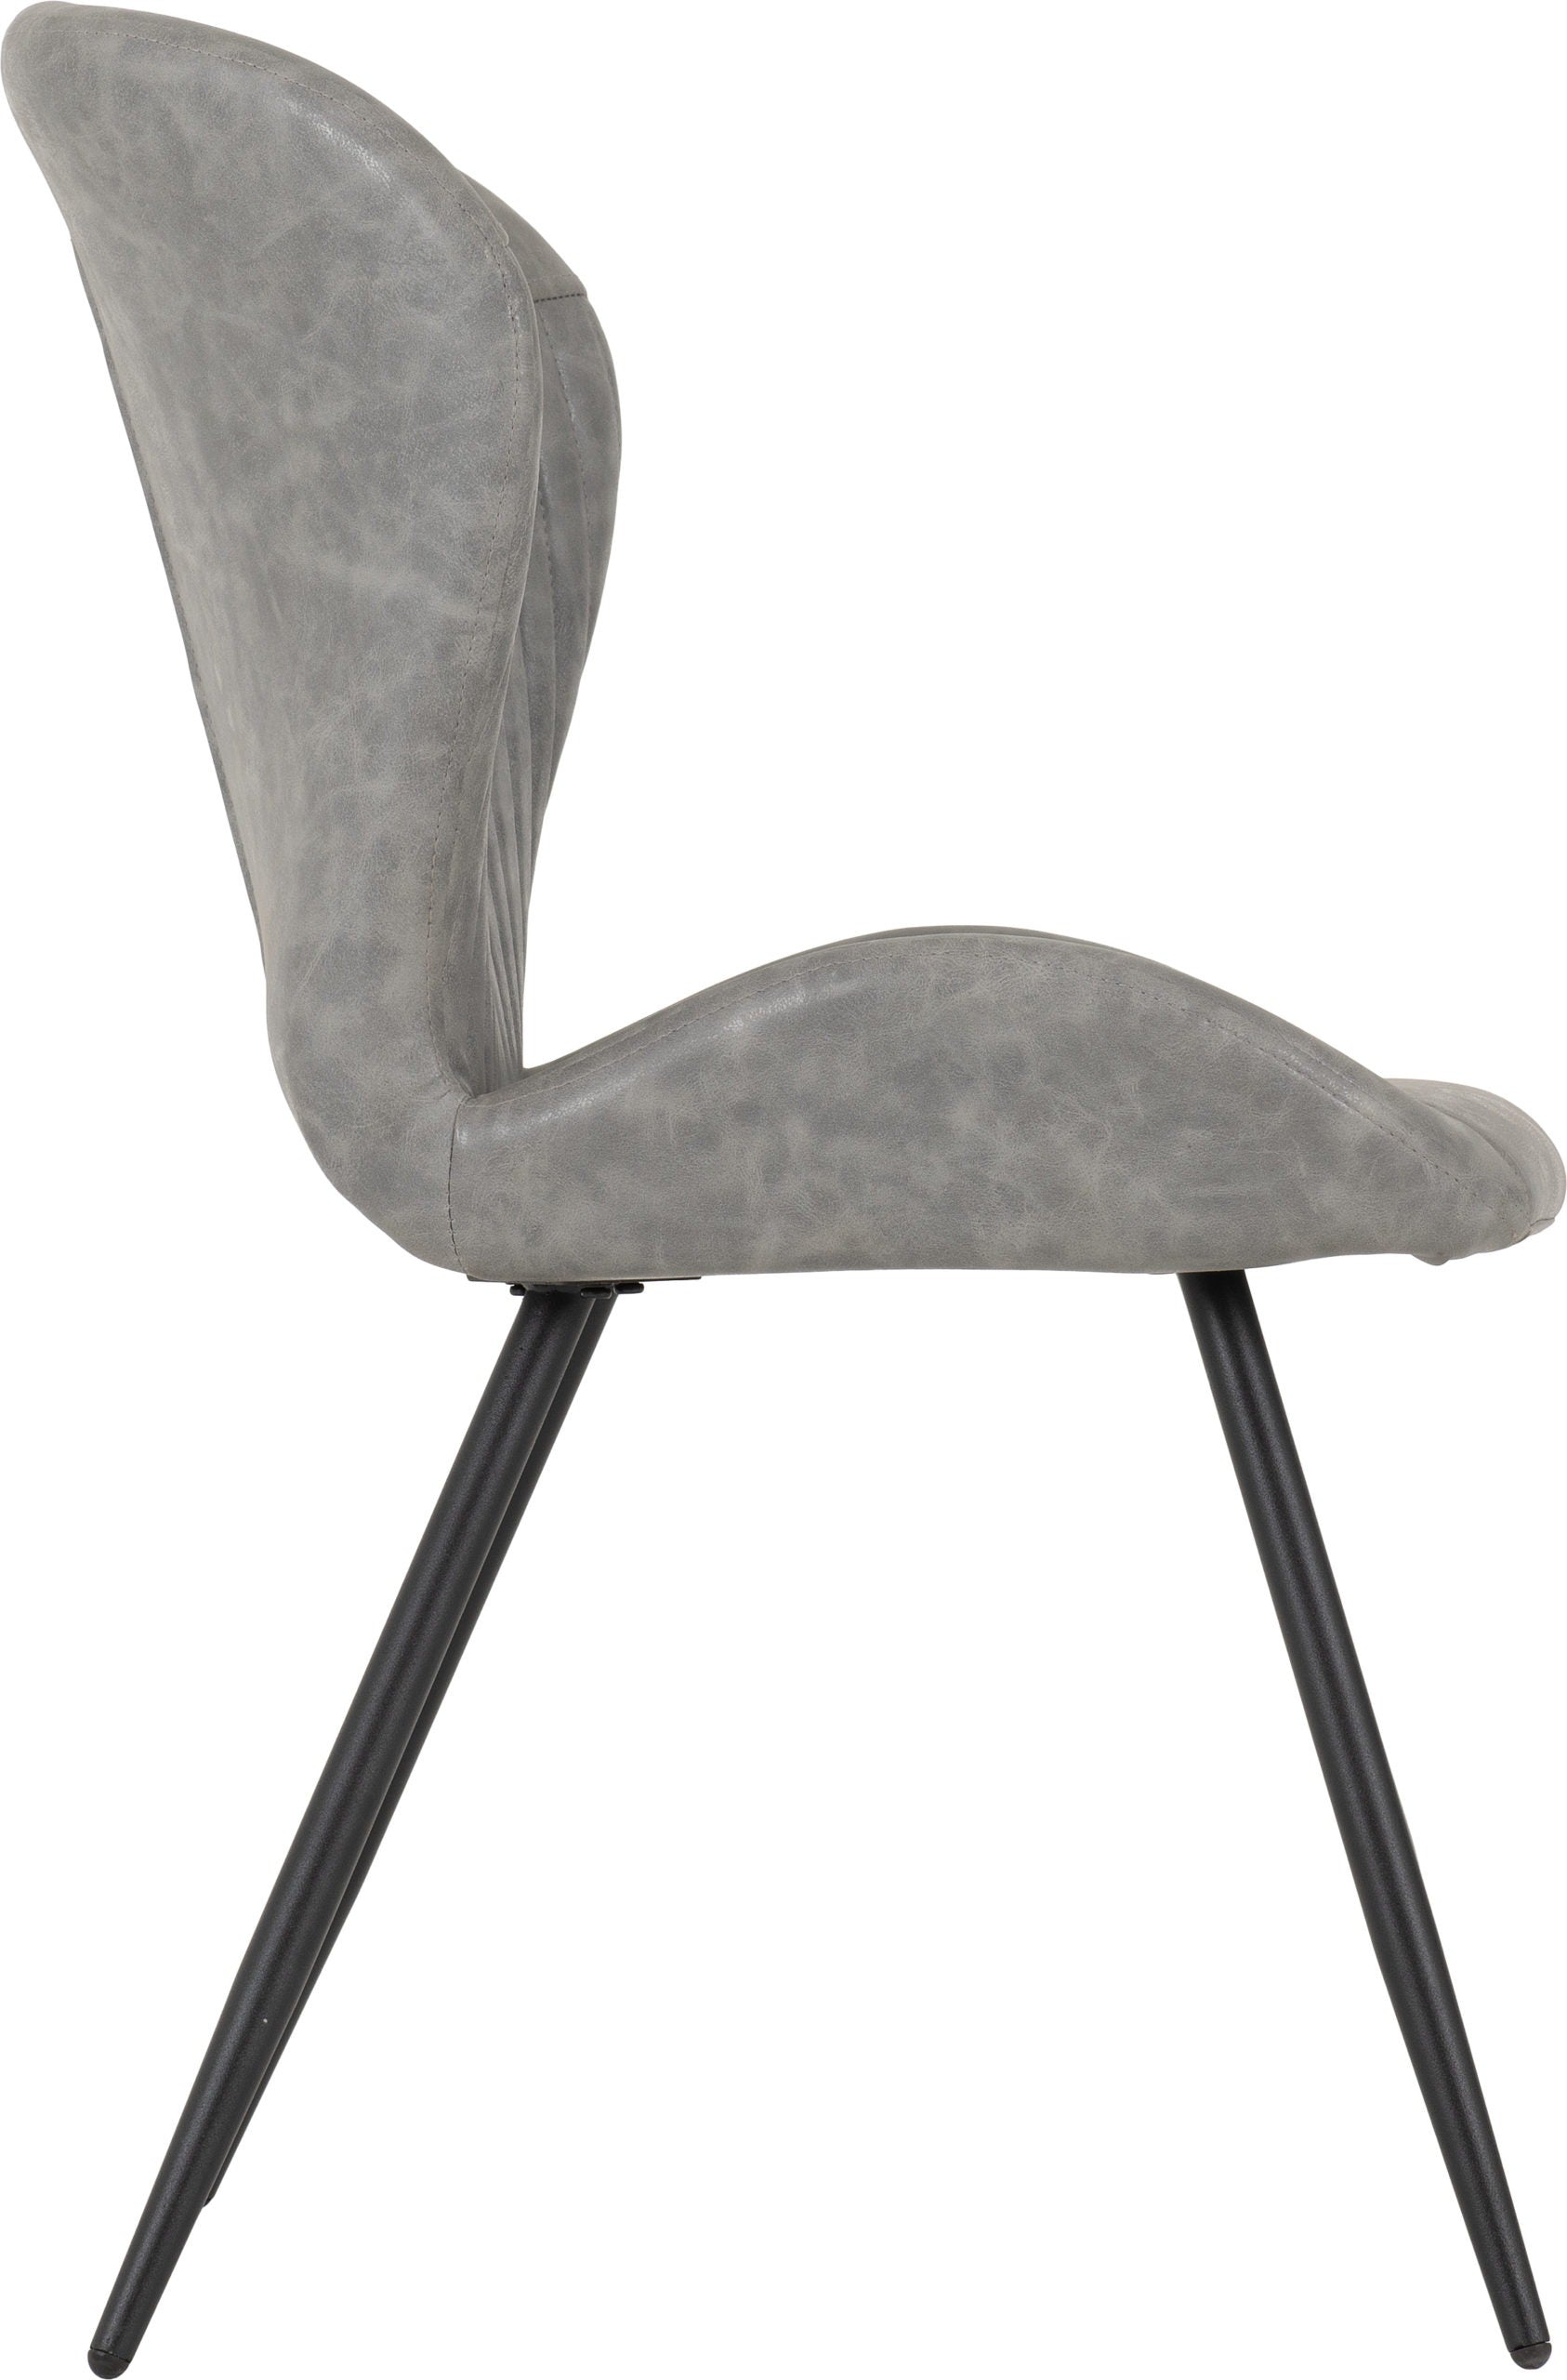 QUEBEC-DINING-CHAIR-GREY-PU-2021-400-402-127-04-scaled.jpg